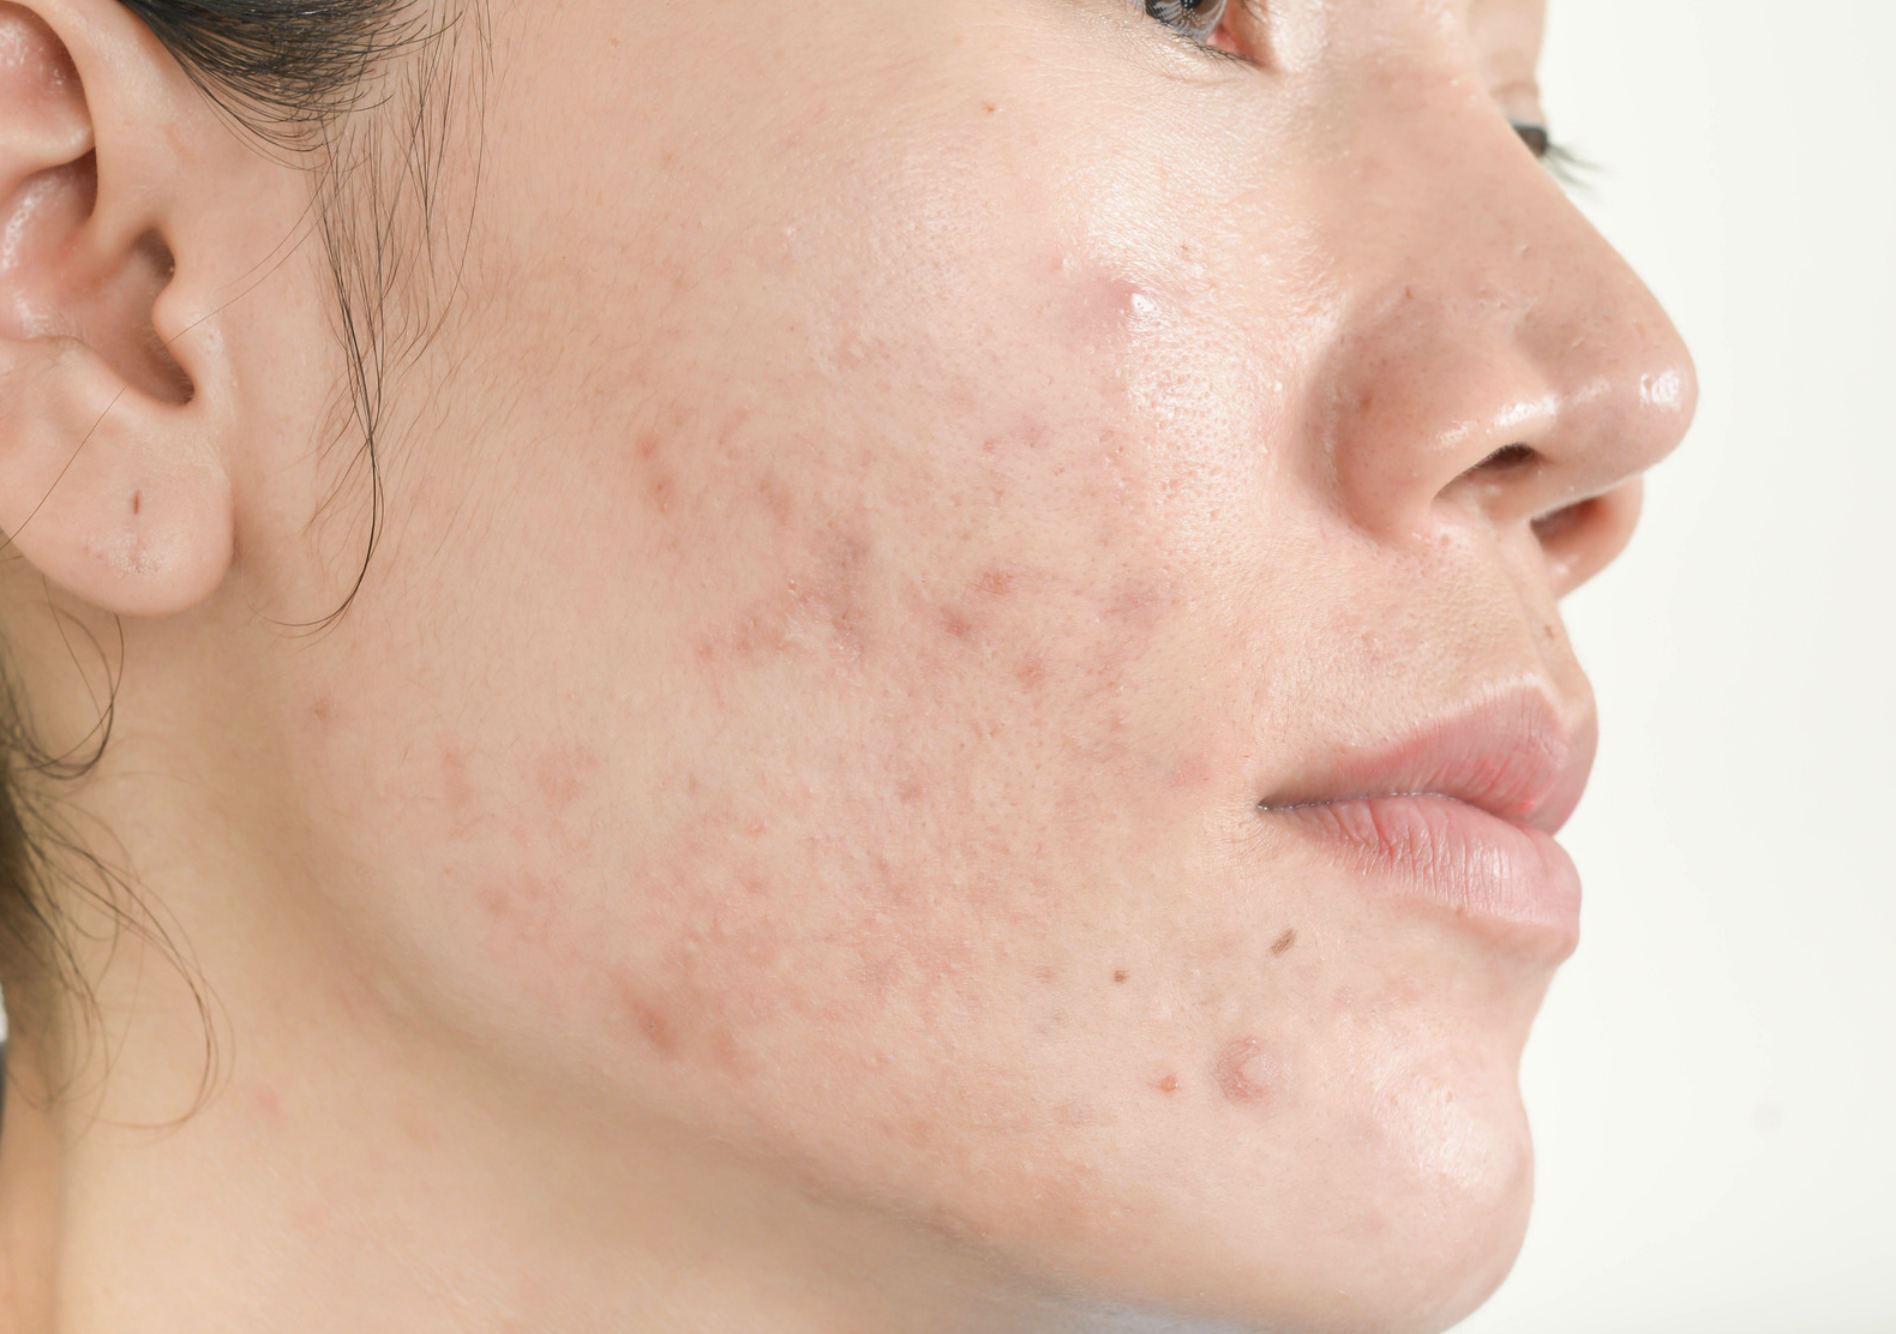 How to get rid of an acne breakout quickly